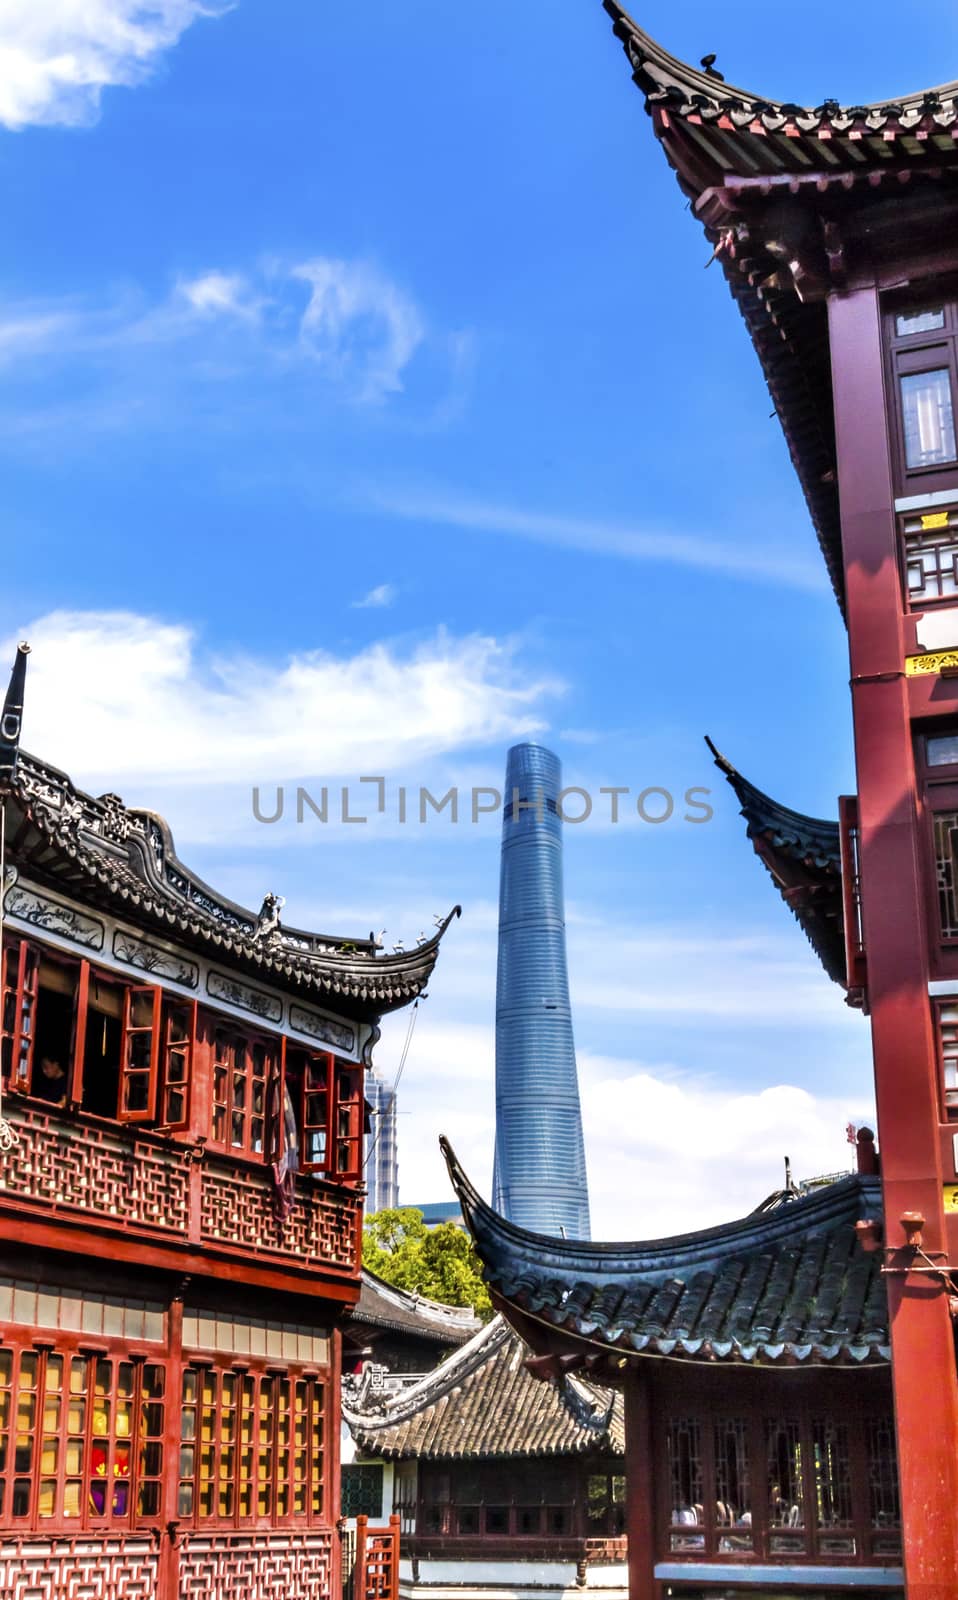 Shanghai Tower, Second Tallest Building in World, from Yuyuan Garden, Old Town, Shanghai China